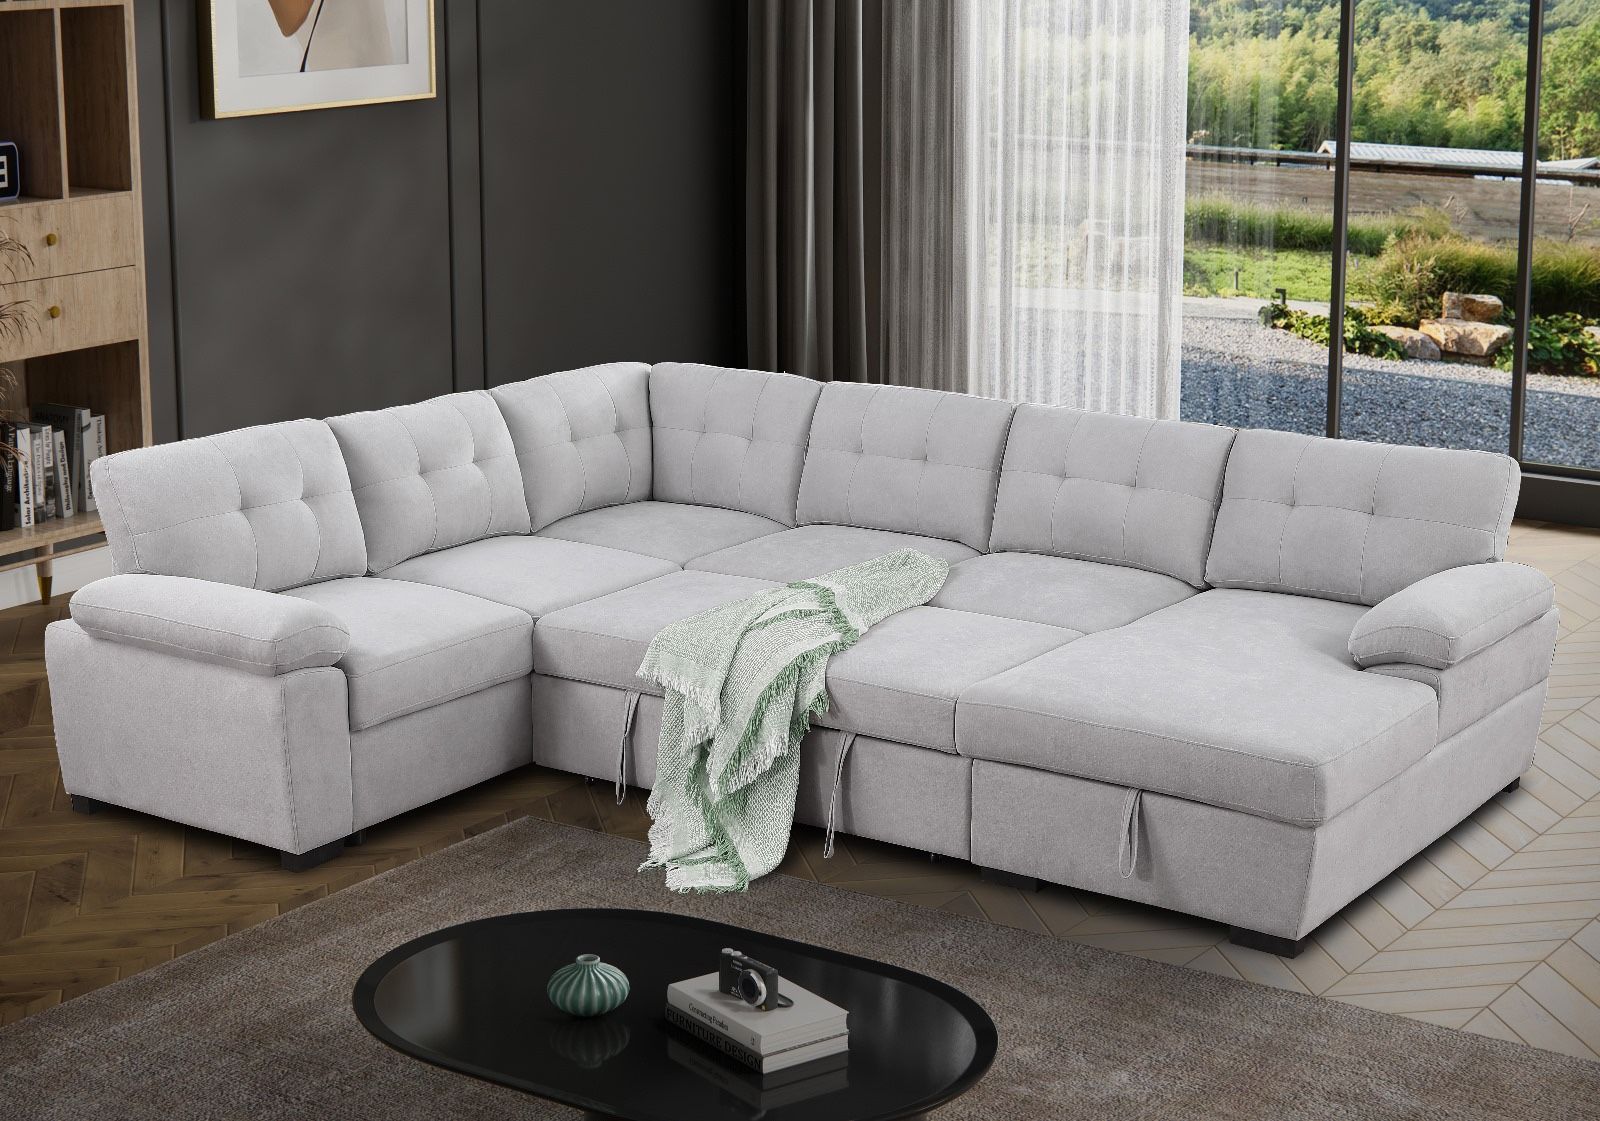 Cozy Living Room Sofa! Sectional, Sectionals, Sectional Sofa Bed, Sofabed, Large Sofa Bed, Couch, Sofa, Sleeper Sofa